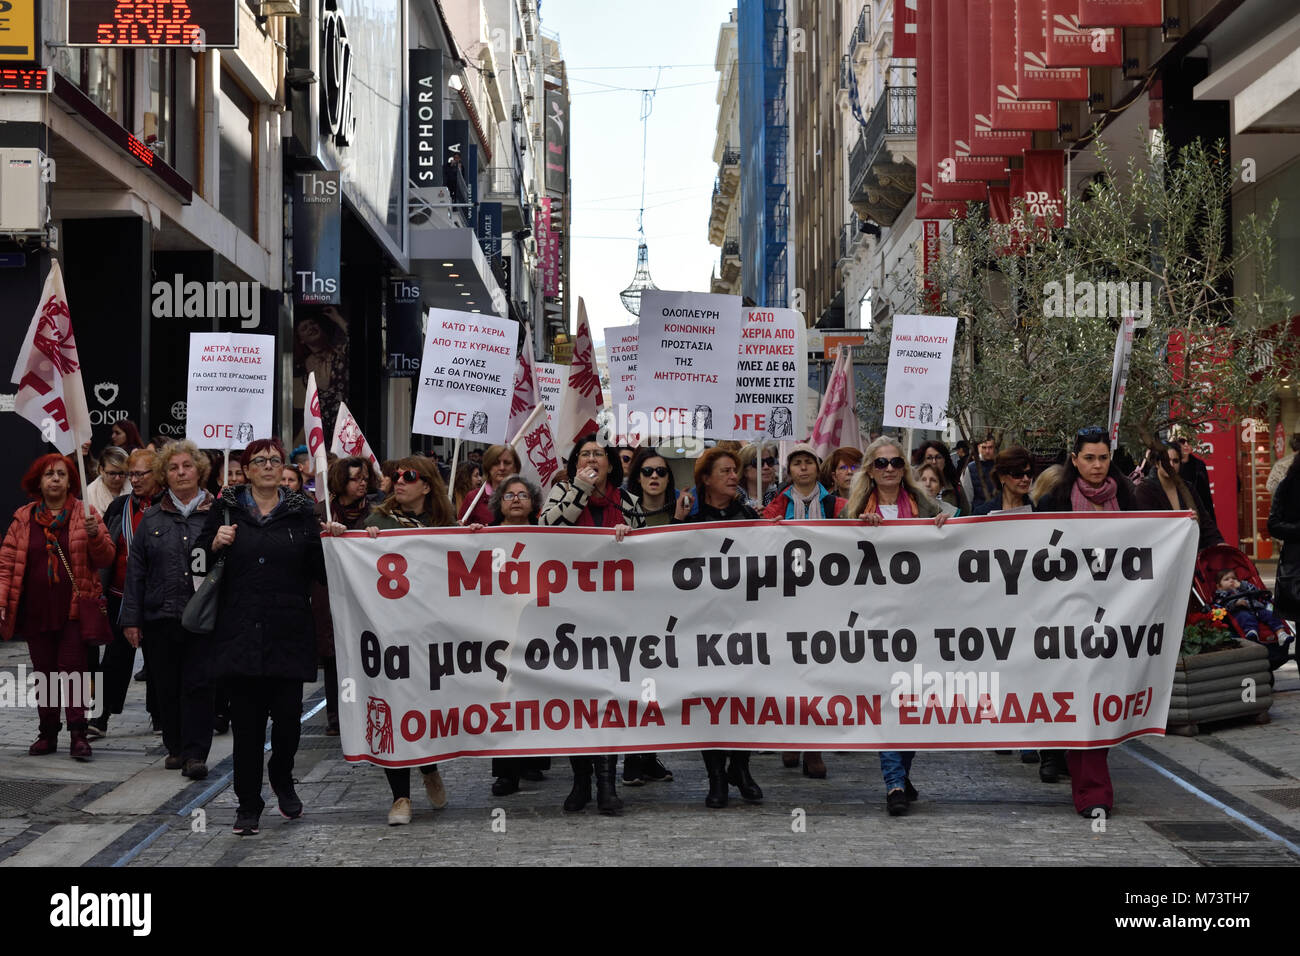 Athens, Greece, 8th March, 2018. Women holding placards and a banner that reads '8th March symbol of fight will lead us in this century also' march chanting slogans to honor the International Women's Day  in Athens, Greece. Credit: Nicolas Koutsokostas/Alamy Live News. Stock Photo